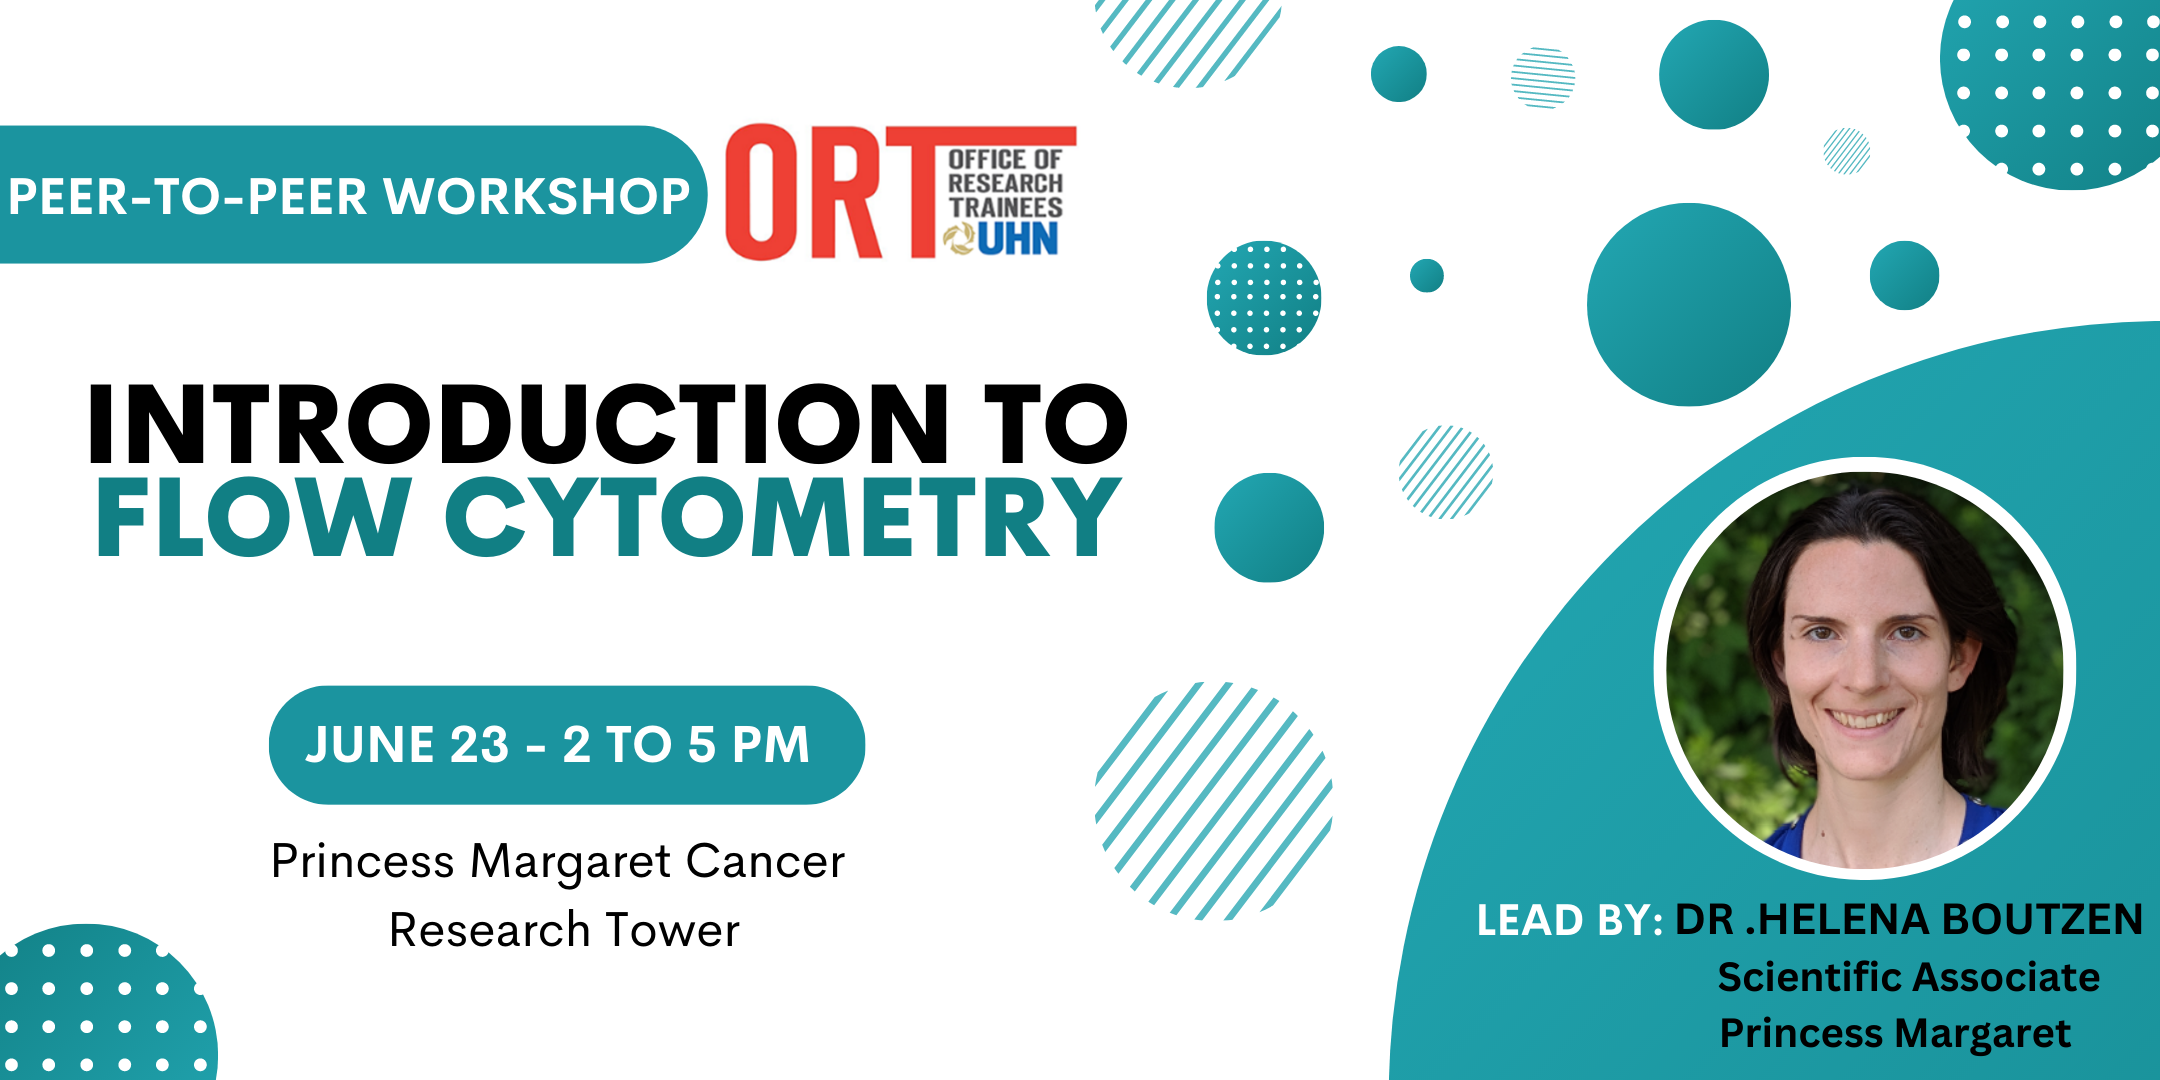 Peer-to-Peer workshop. Introduction to Flow Cytometry. June 23, 2 -5 pm. Princess Margaret Cancer Research Tower. Lead by Helene Boutzen. Scientific Associate. Princess Margaret